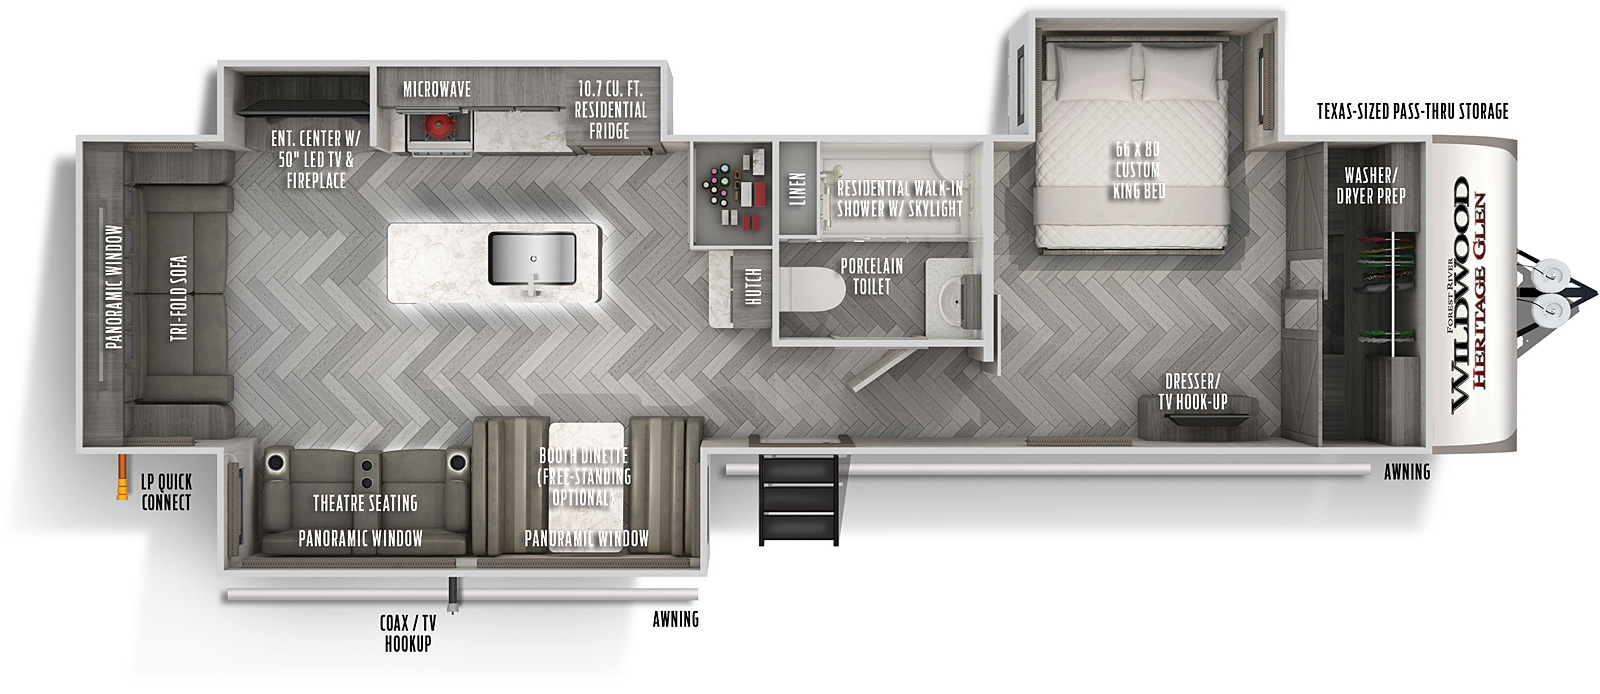 Heritage Glen 308RL floorplan. The 308RL has 3 slide outs and one entry door.